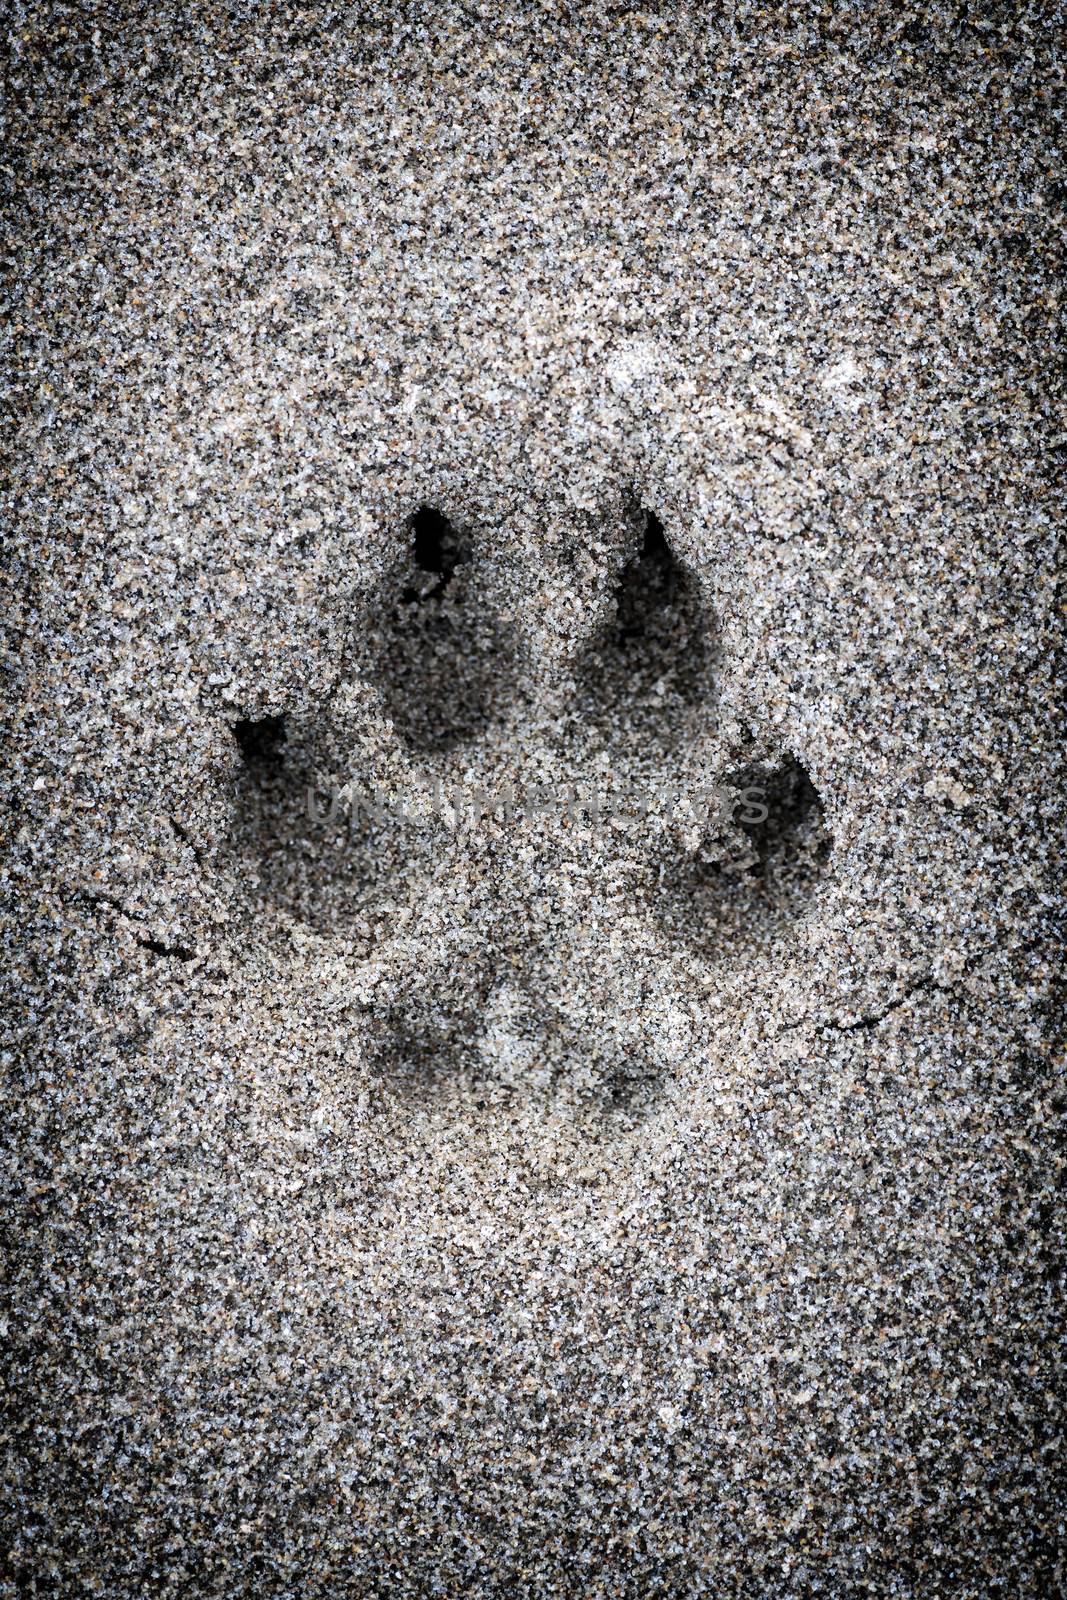 Closeup of dog paw print in sand